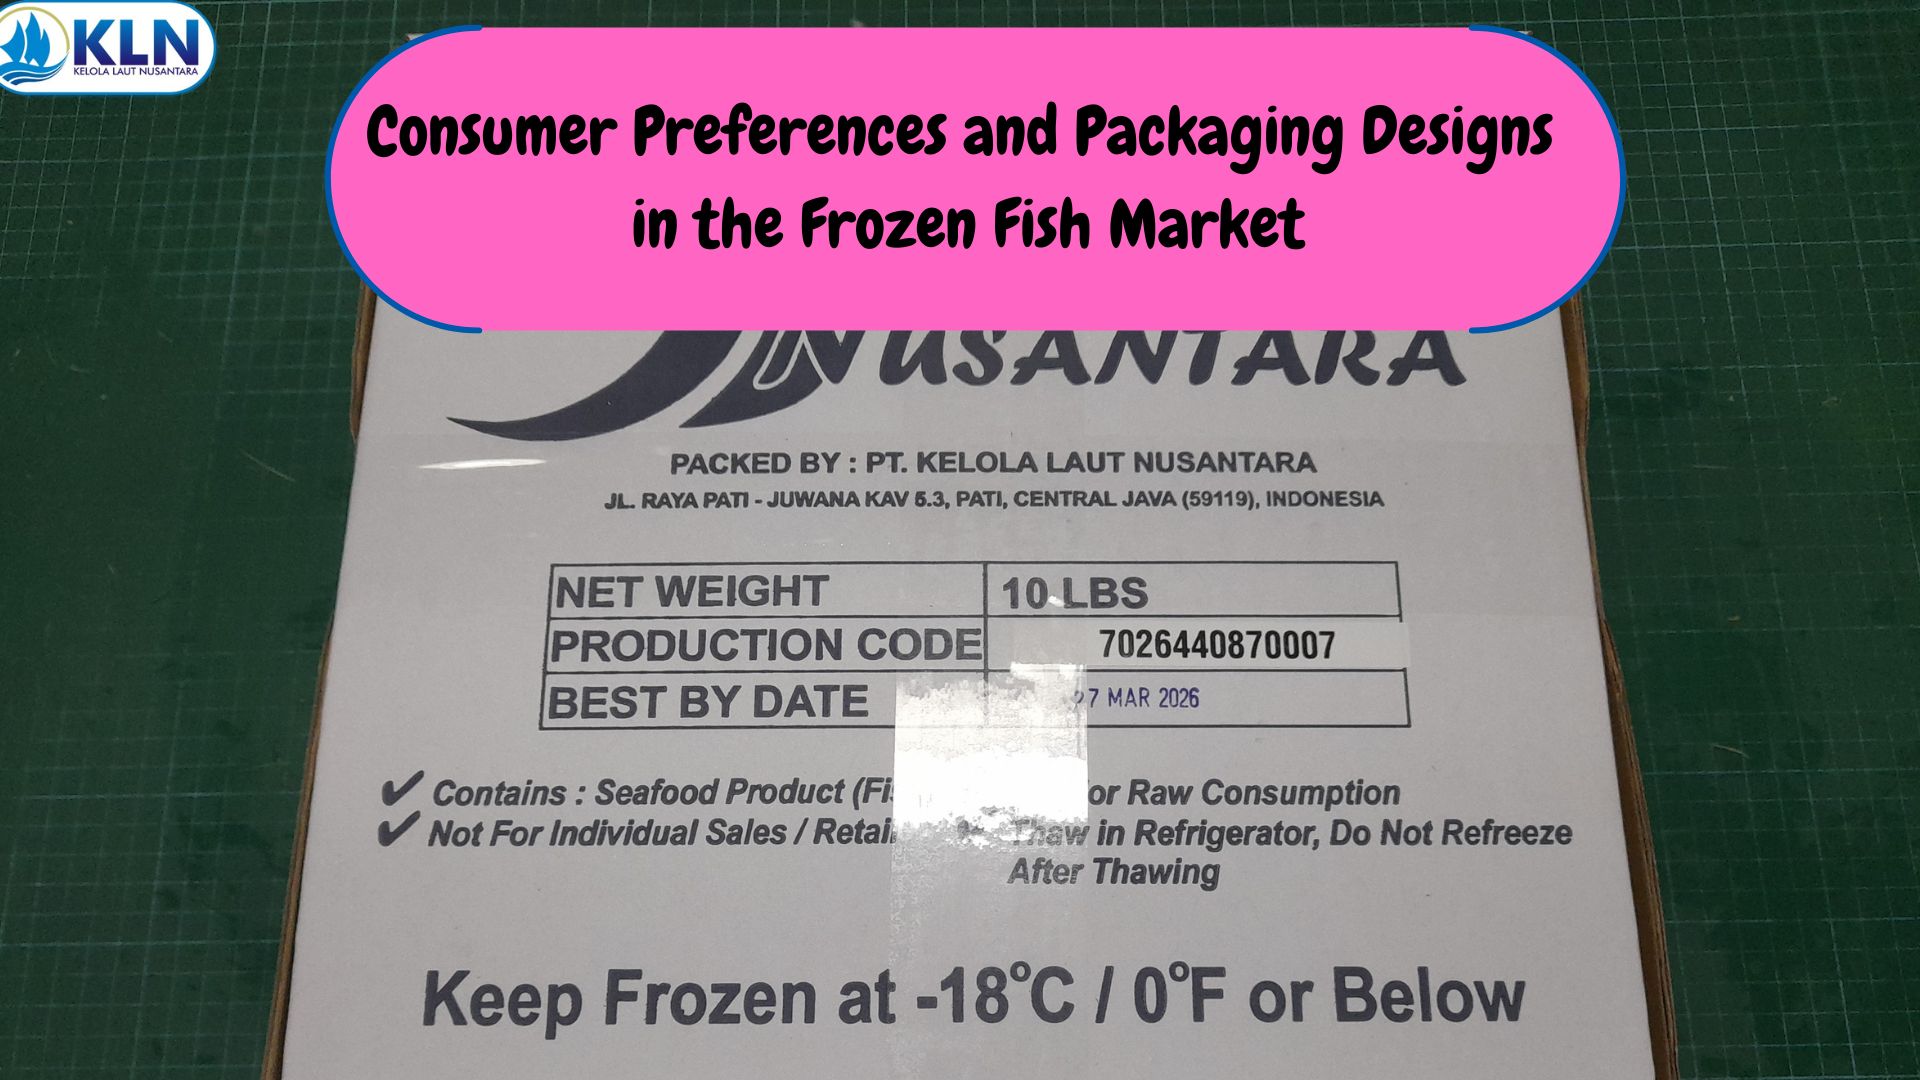 Consumer Preferences and Packaging Designs in the Frozen Fish Market